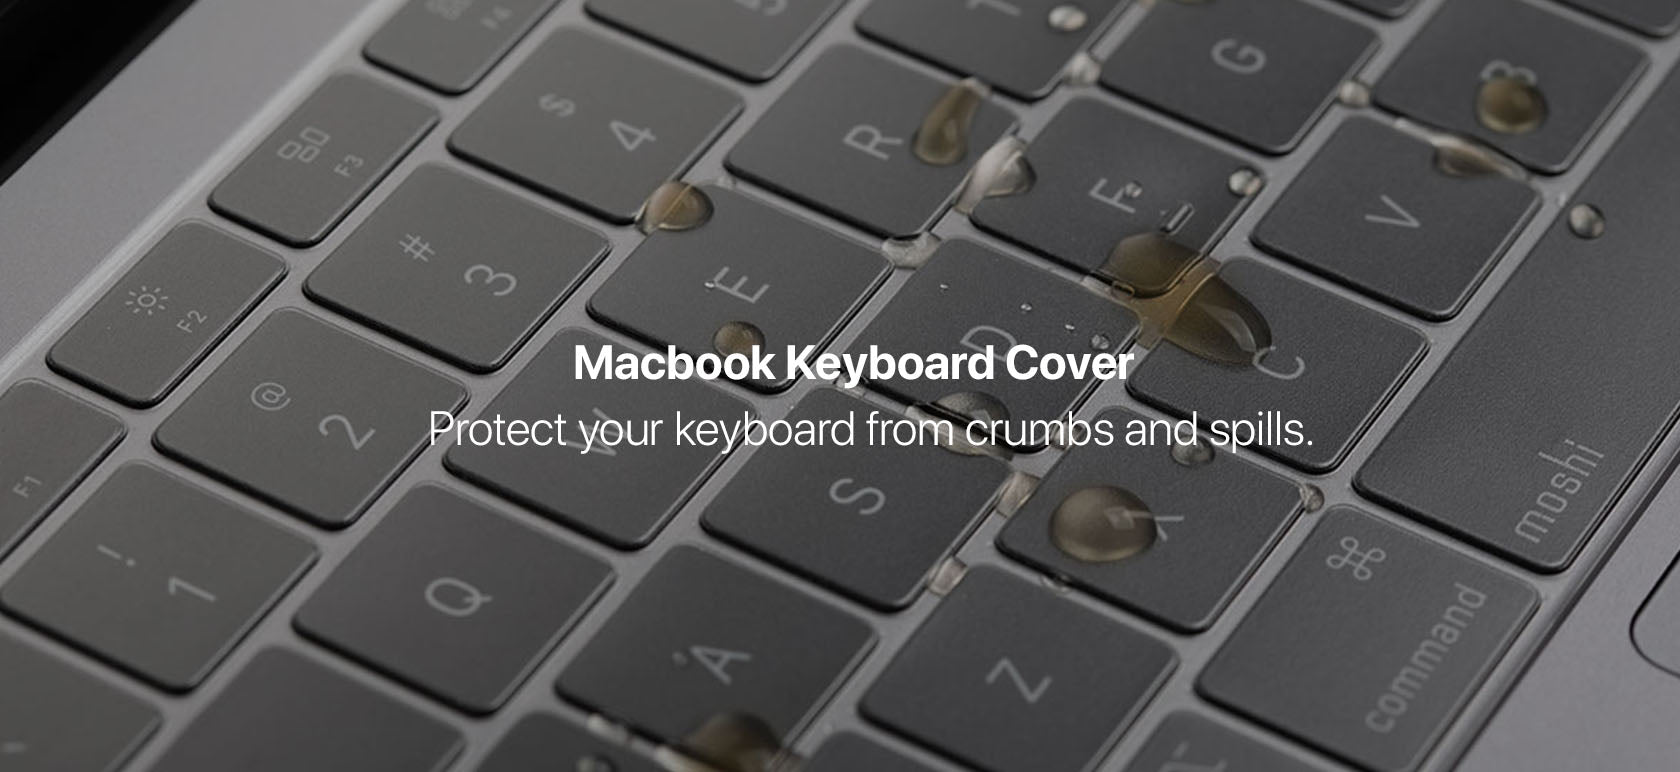 Macbook Keyboard Cover - Protect your keyboard from crumbs and spills.